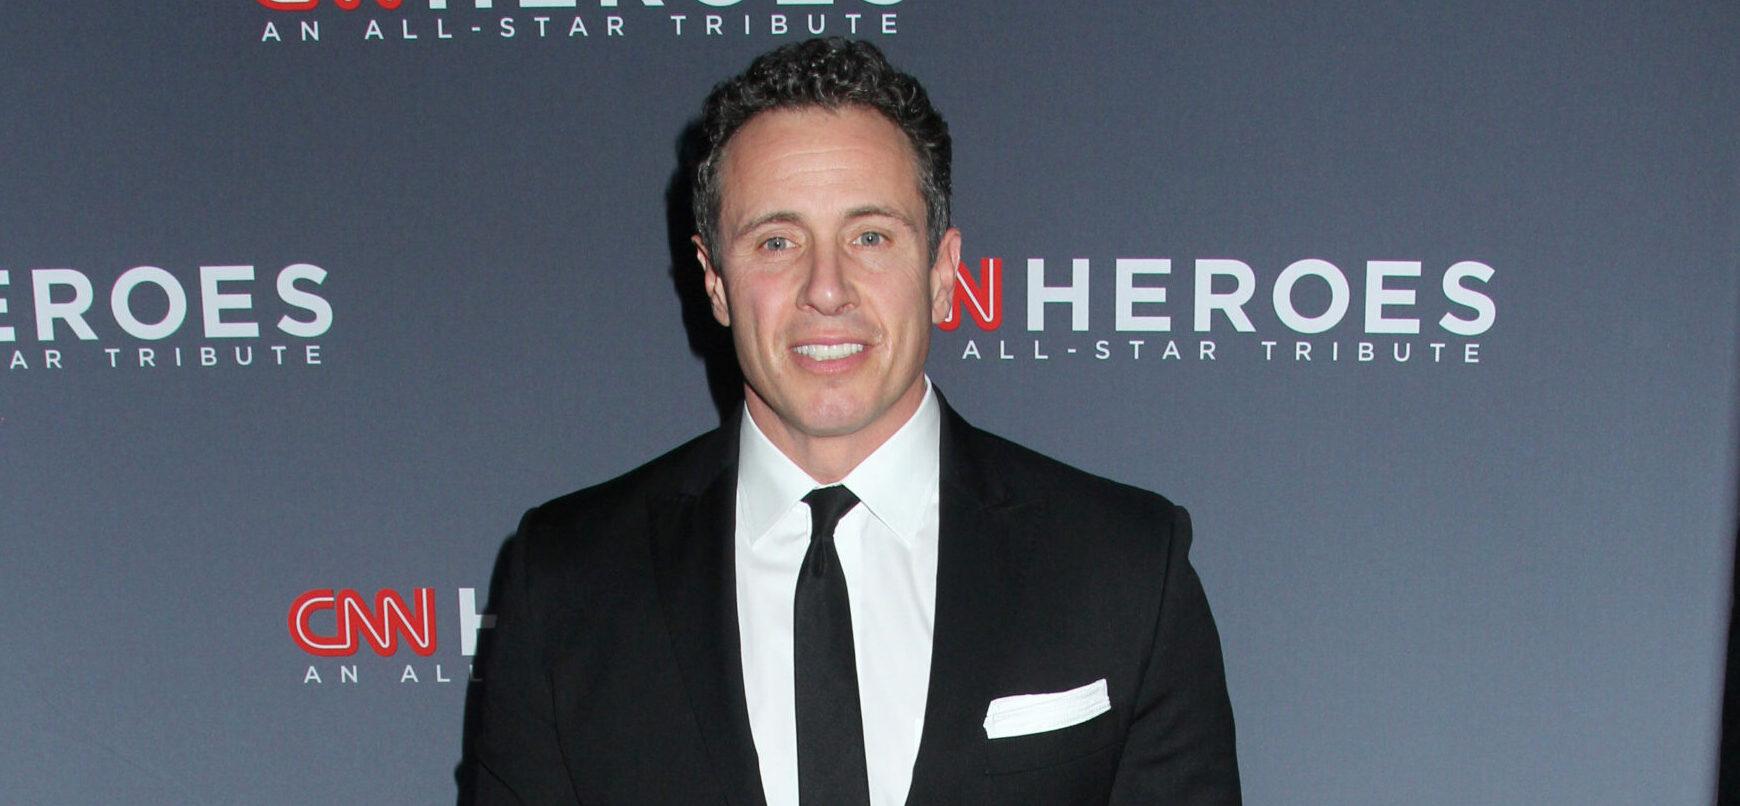 Chris Cuomo’s Book Canceled, CNN Boss Says He ‘Deserved Termination’